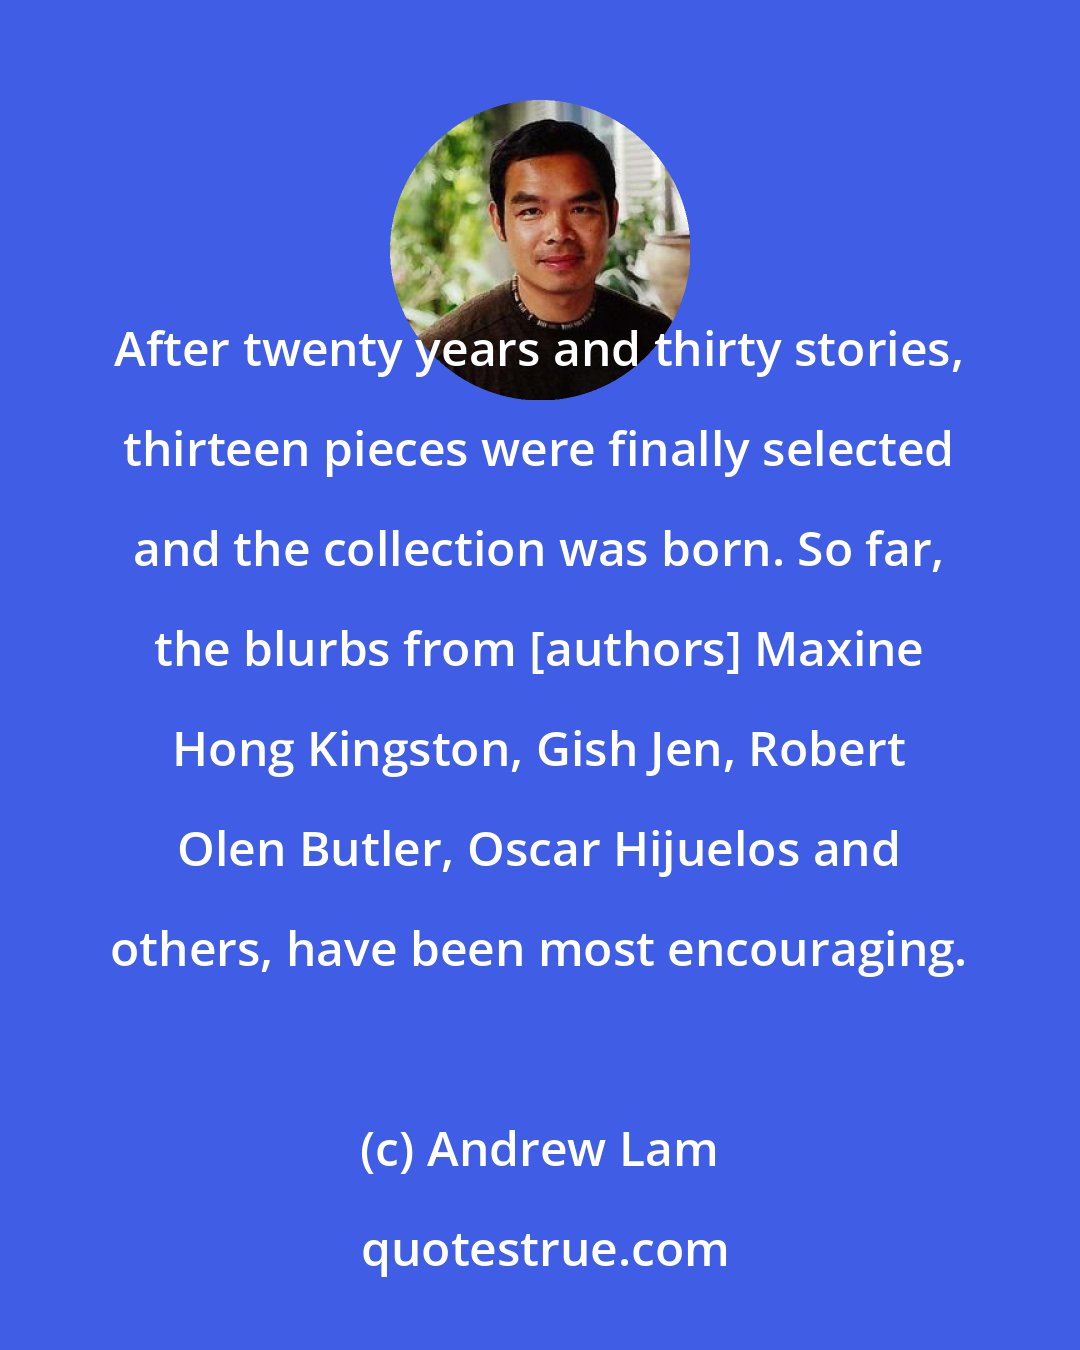 Andrew Lam: After twenty years and thirty stories, thirteen pieces were finally selected and the collection was born. So far, the blurbs from [authors] Maxine Hong Kingston, Gish Jen, Robert Olen Butler, Oscar Hijuelos and others, have been most encouraging.